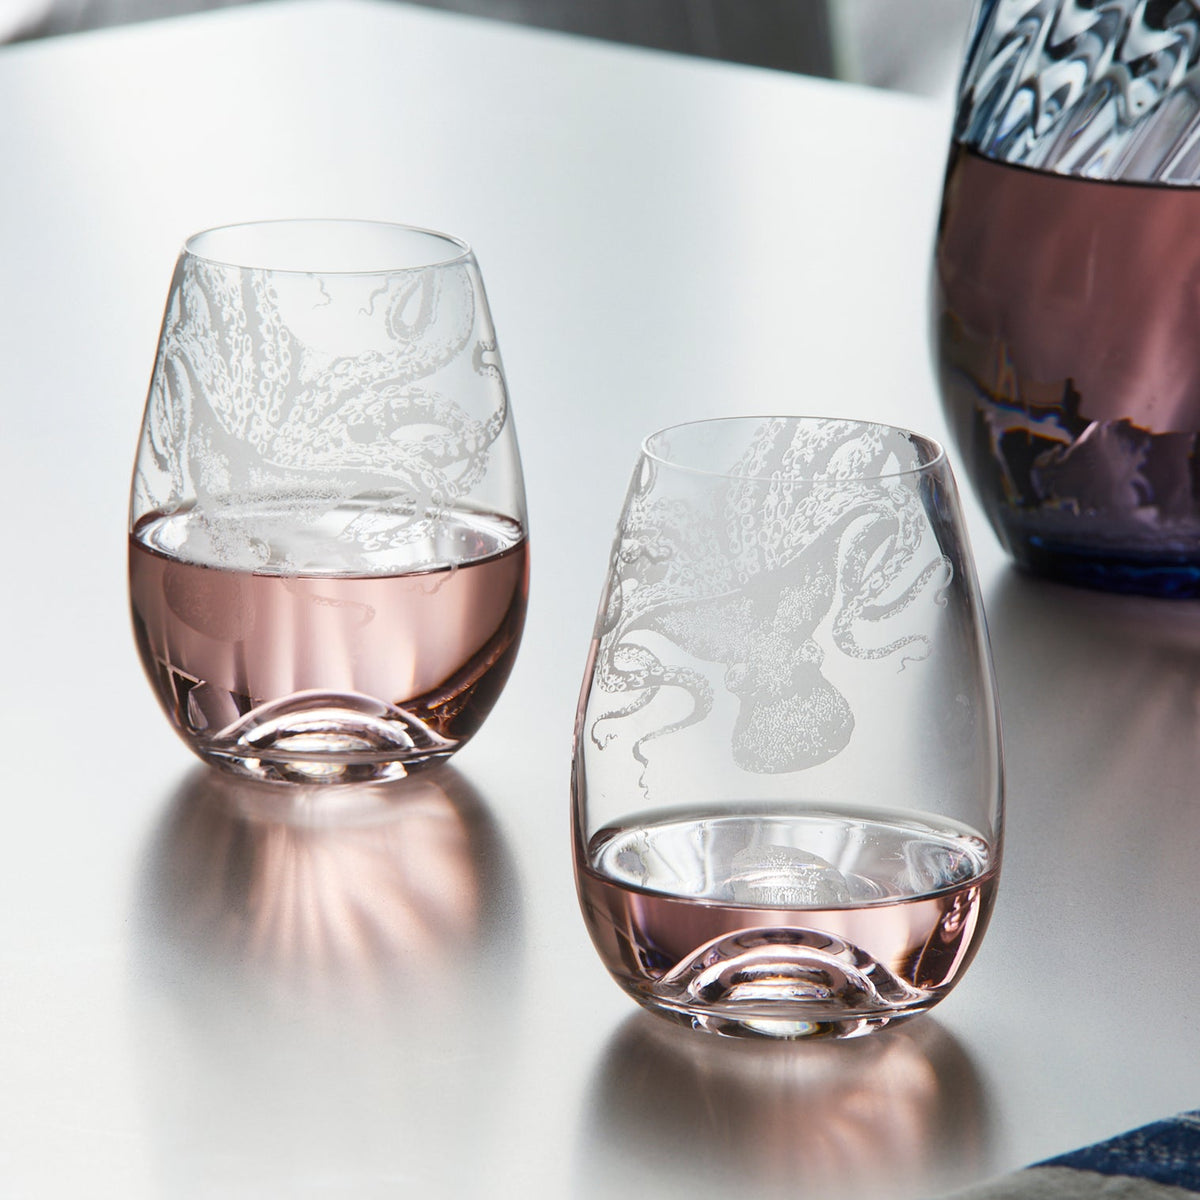 Two Lucy Stemless Wine Glasses by Caskata Artisanal Home on a table next to a vase.